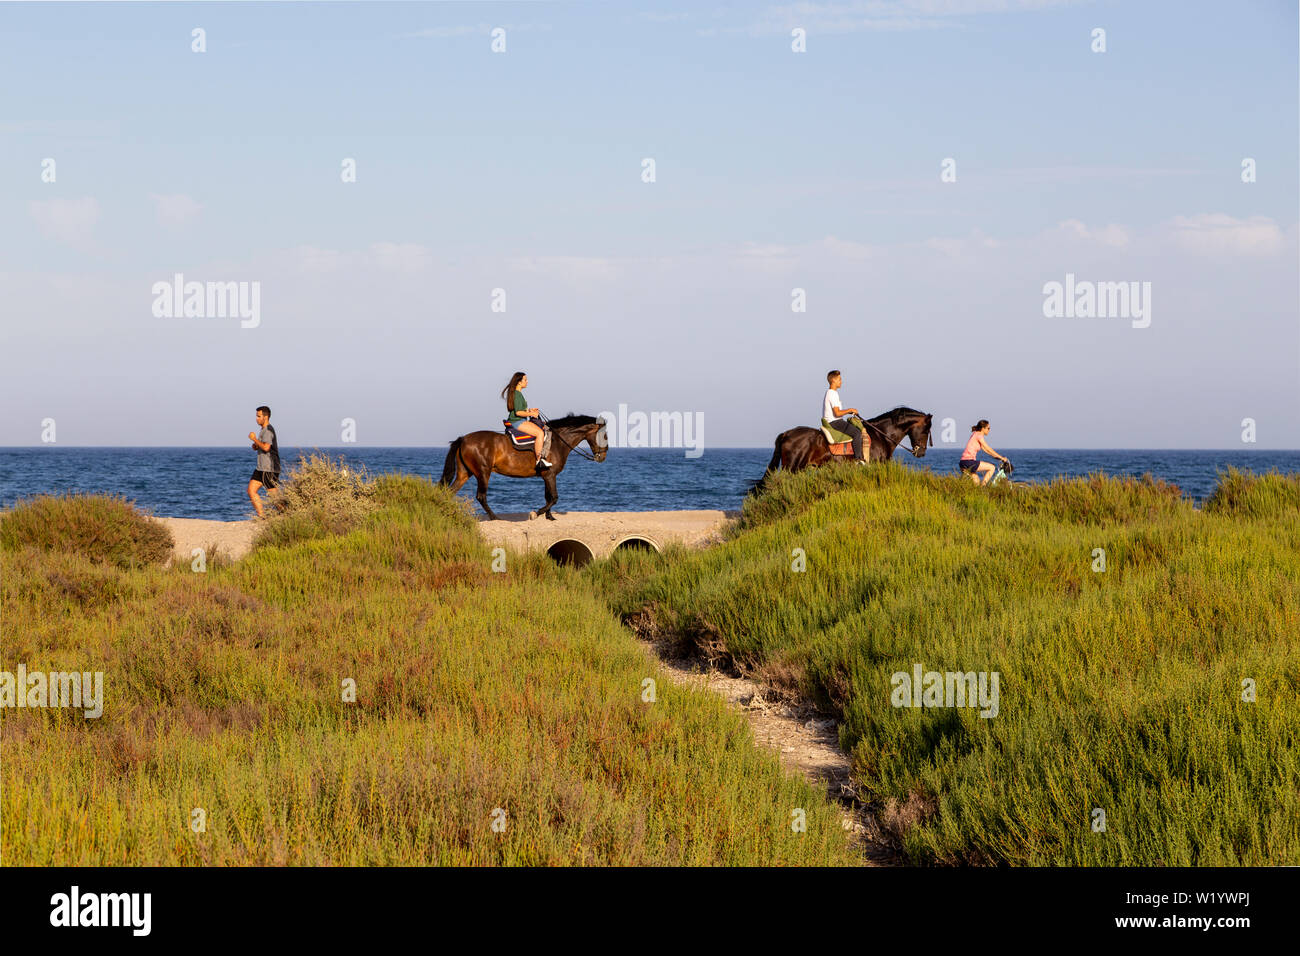 Good example showing the contrast between exercise and leisure. Two people on horse back riding, one person on bicycle cycling and one person jogging. Stock Photo